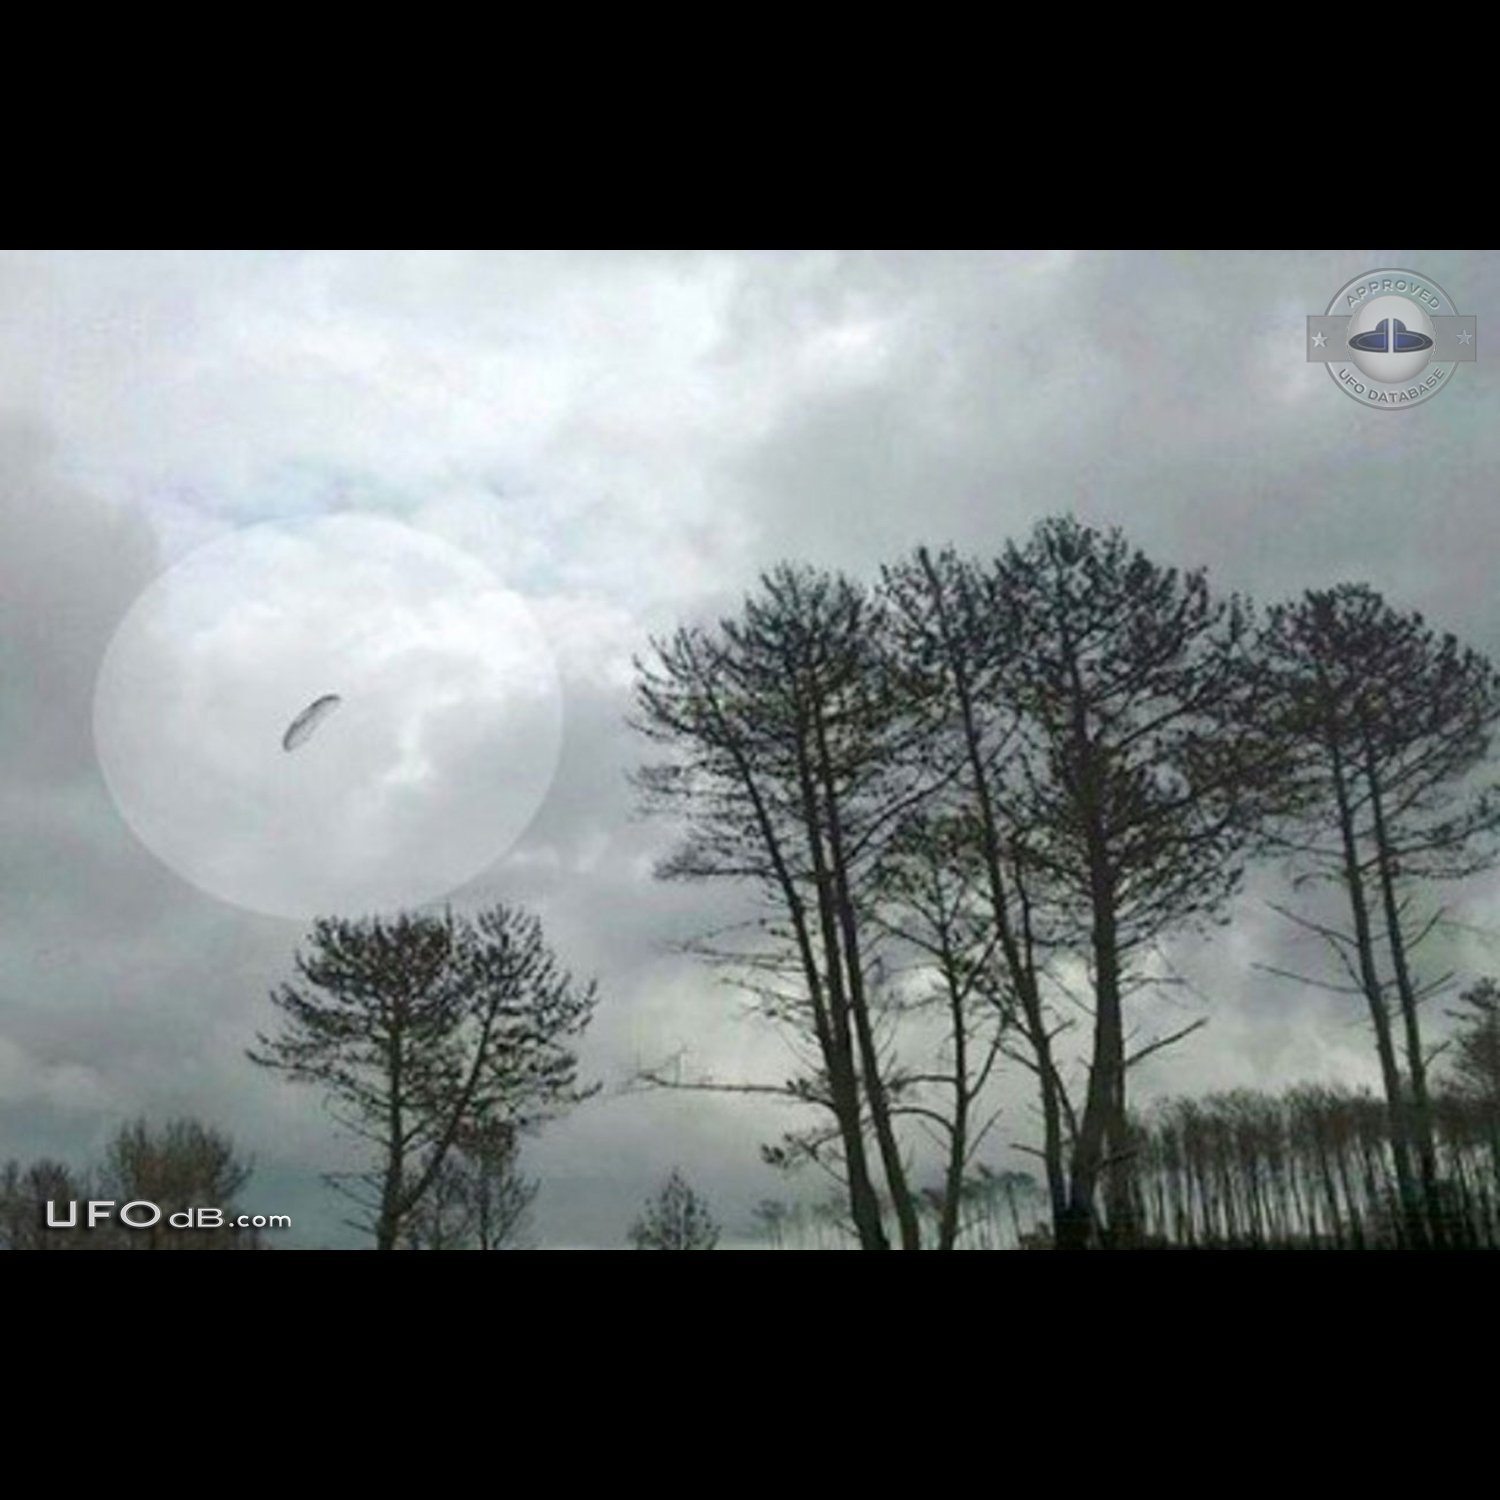 Parachute shaped UFO seen over Claromeco, Tres Arroyos Argentina UFO Picture #620-1